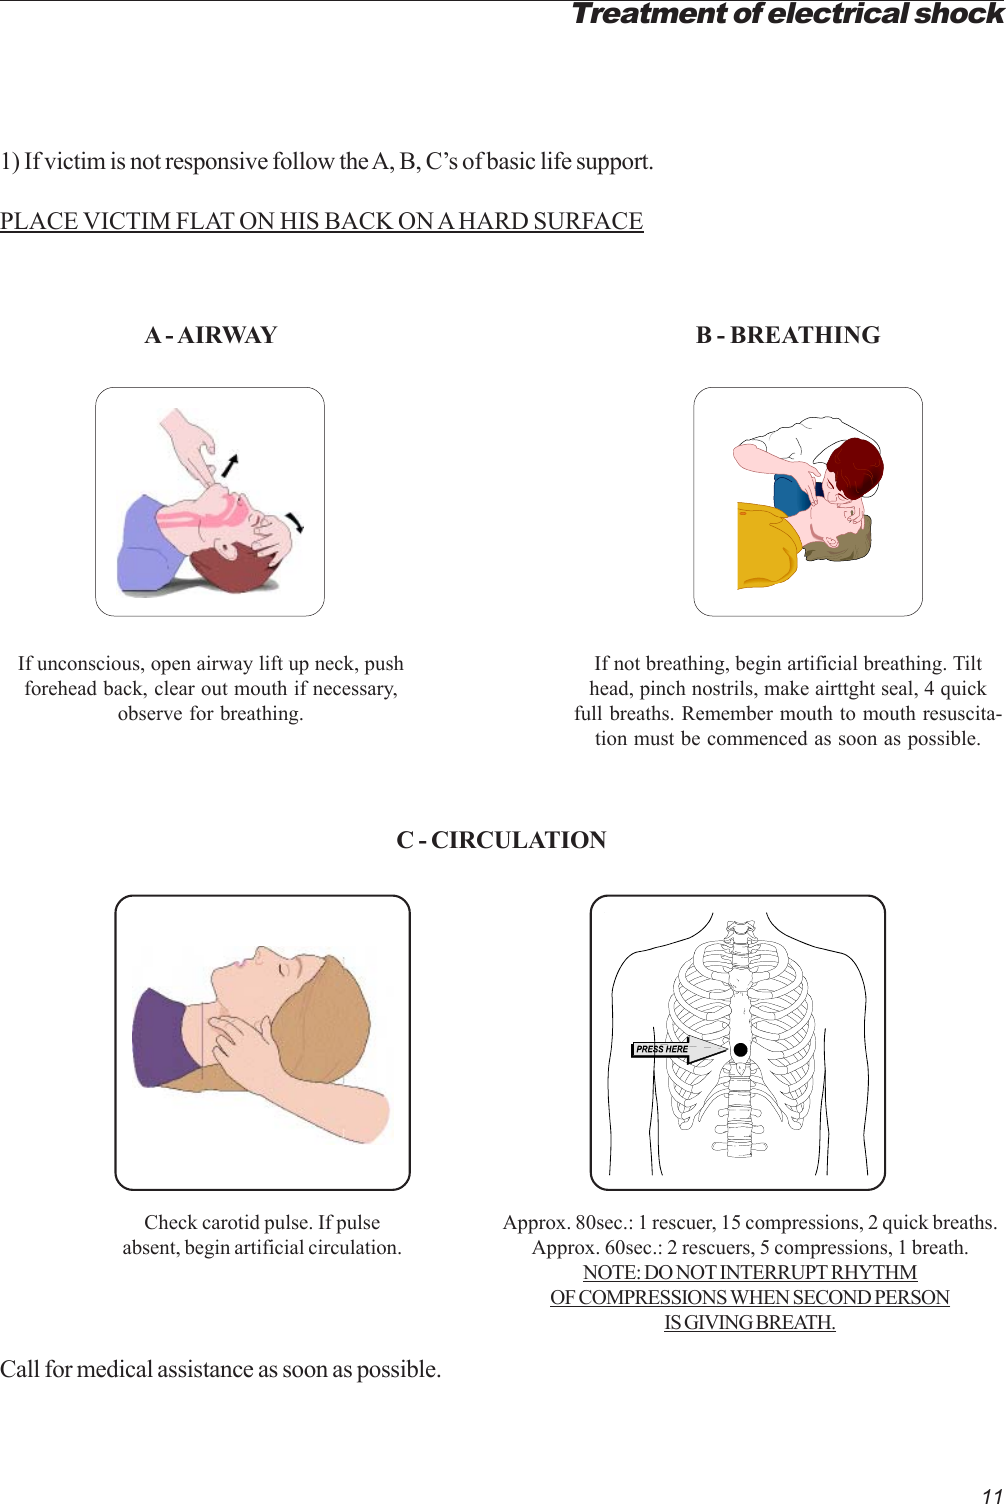 11A - AIRWAYIf unconscious, open airway lift up neck, pushforehead back, clear out mouth if necessary,observe for breathing.Treatment of electrical shock1) If victim is not responsive follow the A, B, C’s of basic life support.PLACE VICTIM FLAT ON HIS BACK ON A HARD SURFACEB - BREATHINGIf not breathing, begin artificial breathing. Tilthead, pinch nostrils, make airttght seal, 4 quickfull breaths. Remember mouth to mouth resuscita-tion must be commenced as soon as possible.C - CIRCULATIONCheck carotid pulse. If pulseabsent, begin artificial circulation.Approx. 80sec.: 1 rescuer, 15 compressions, 2 quick breaths.Approx. 60sec.: 2 rescuers, 5 compressions, 1 breath.NOTE: DO NOT INTERRUPT RHYTHMOF COMPRESSIONS WHEN SECOND PERSONIS GIVING BREATH.Call for medical assistance as soon as possible.